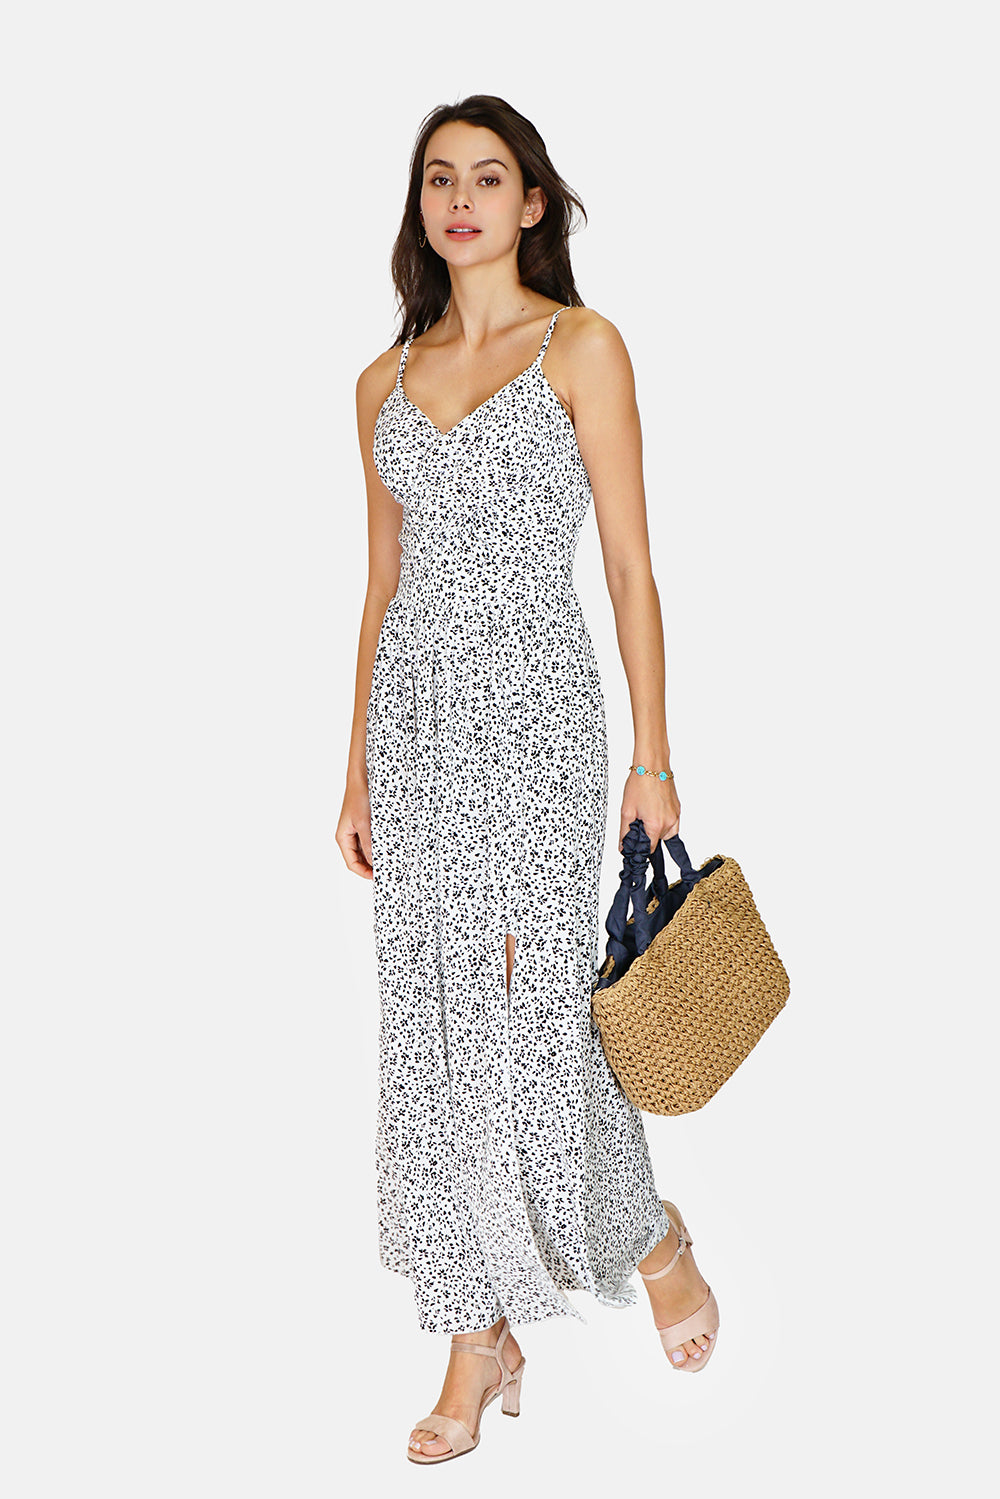 Long midi dress with thin straps, neckline and tie at the back